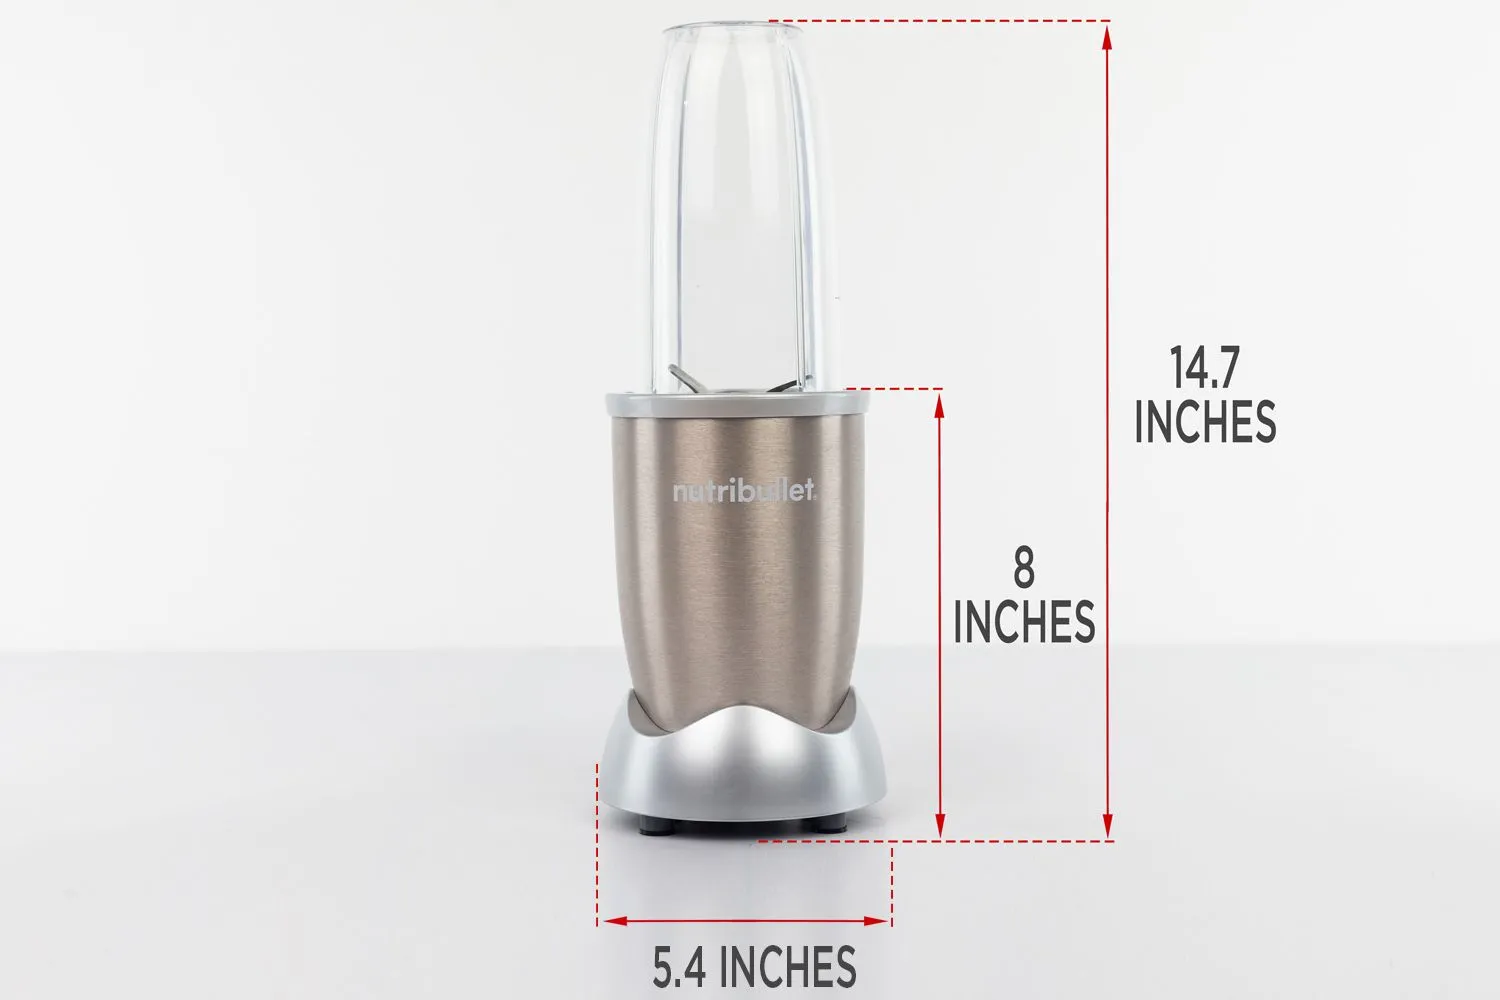 NutriBullet Pro 900 blender rated 'safety hazard' by Consumer Reports